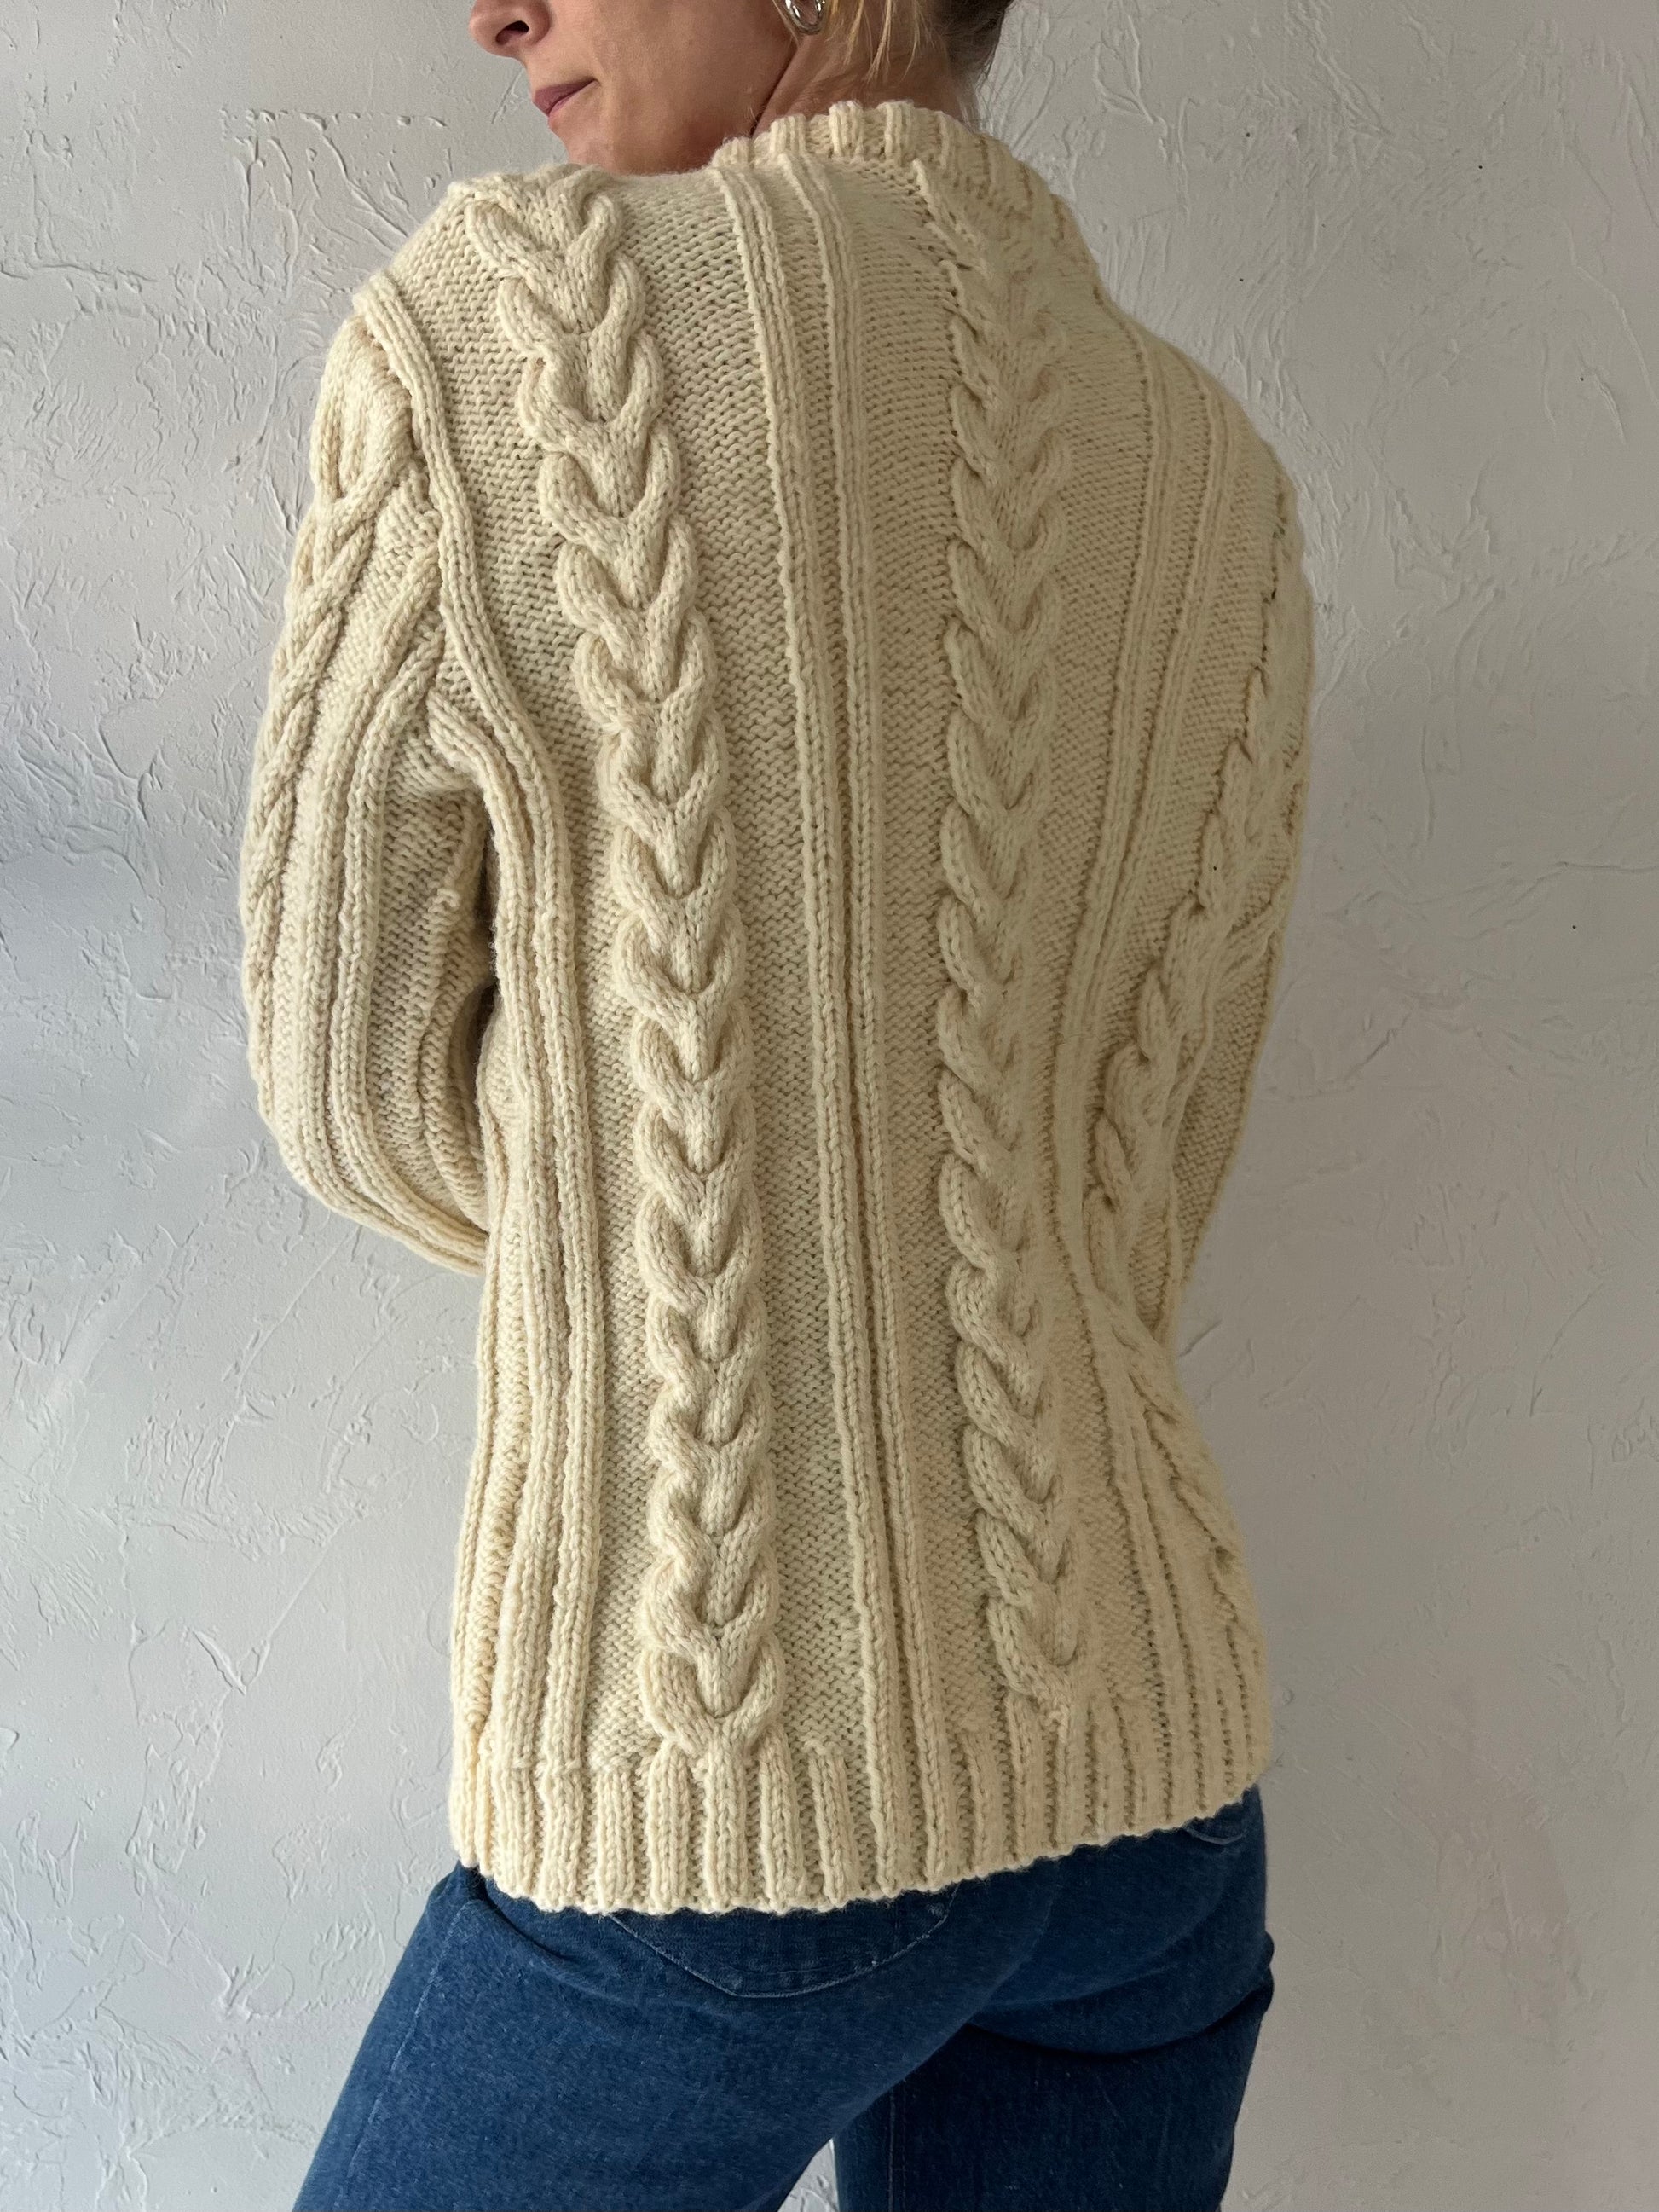 USA-Made Cotton Cable-Knit Sweater [vintage, small/medium]